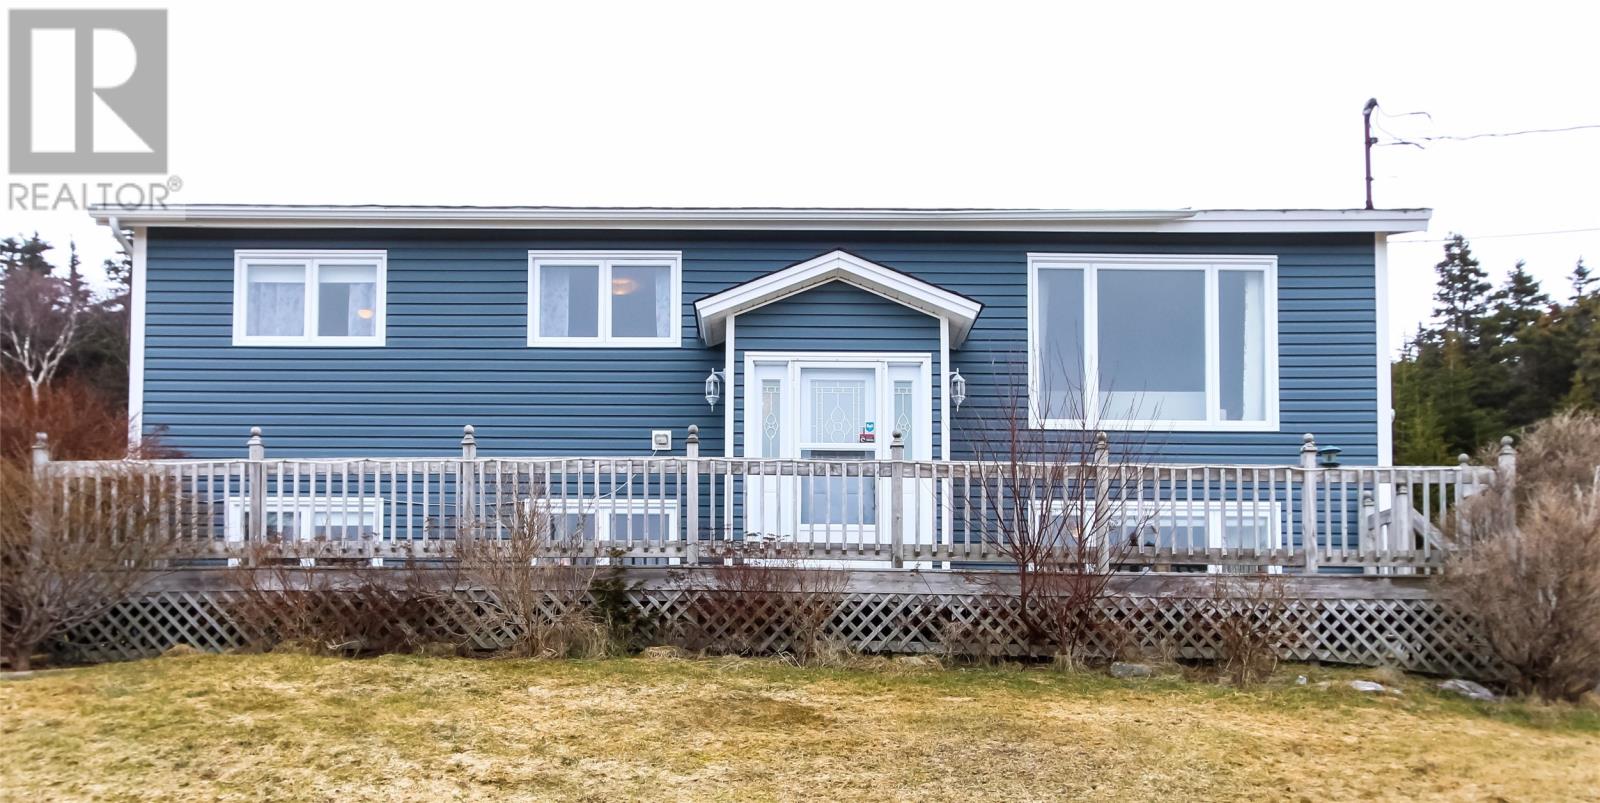 540 Marine Drive, Outer Cove, A1K4C3, 4 Bedrooms Bedrooms, ,2 BathroomsBathrooms,Single Family,For sale,Marine,1269304